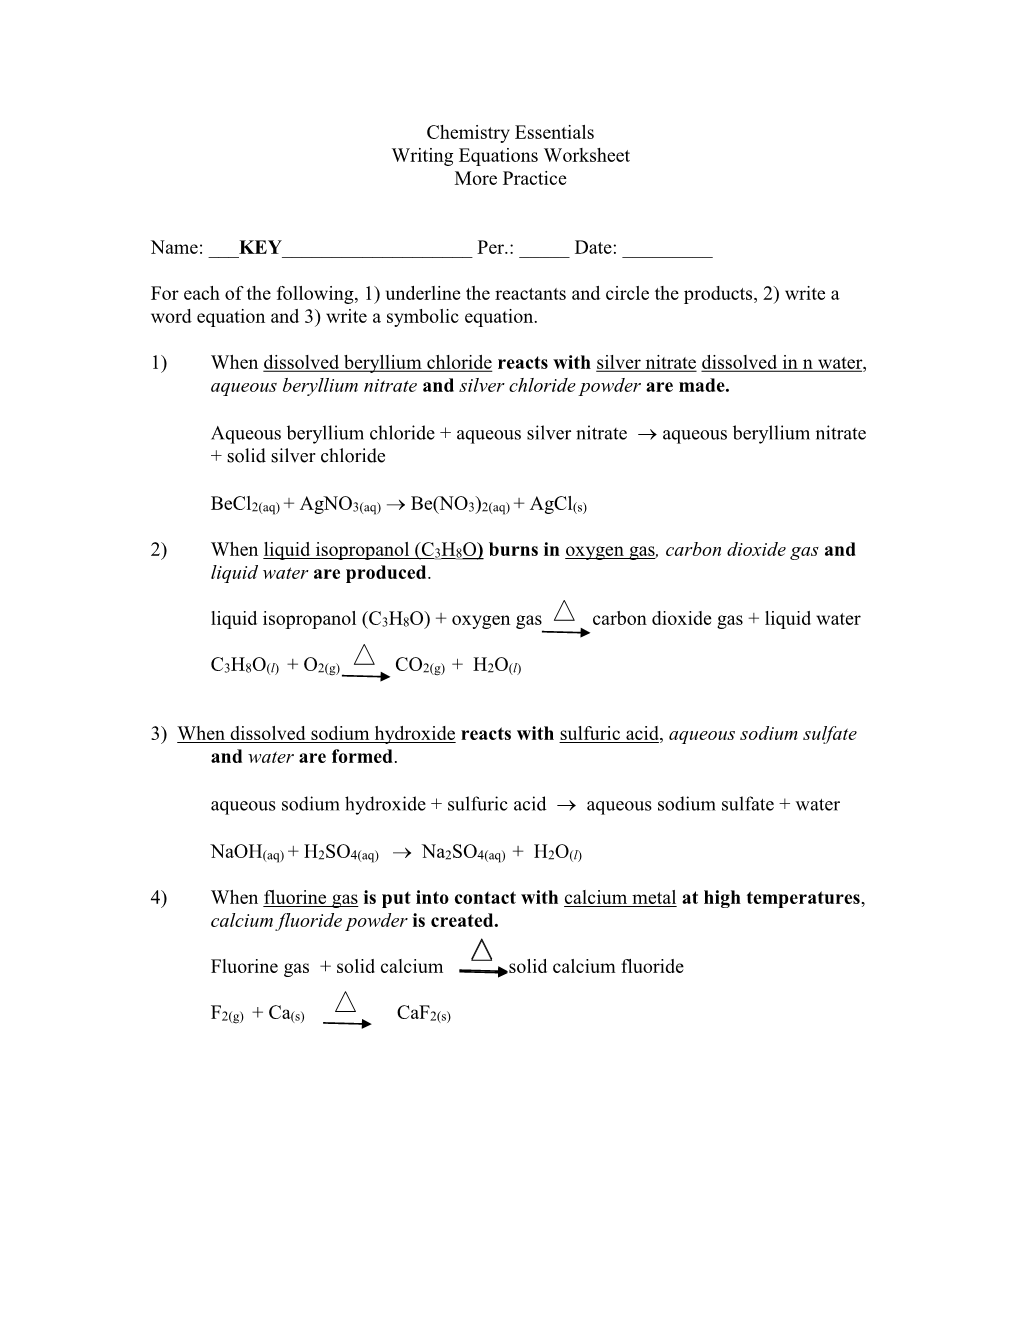 Writing Equations More Practice.Pdf